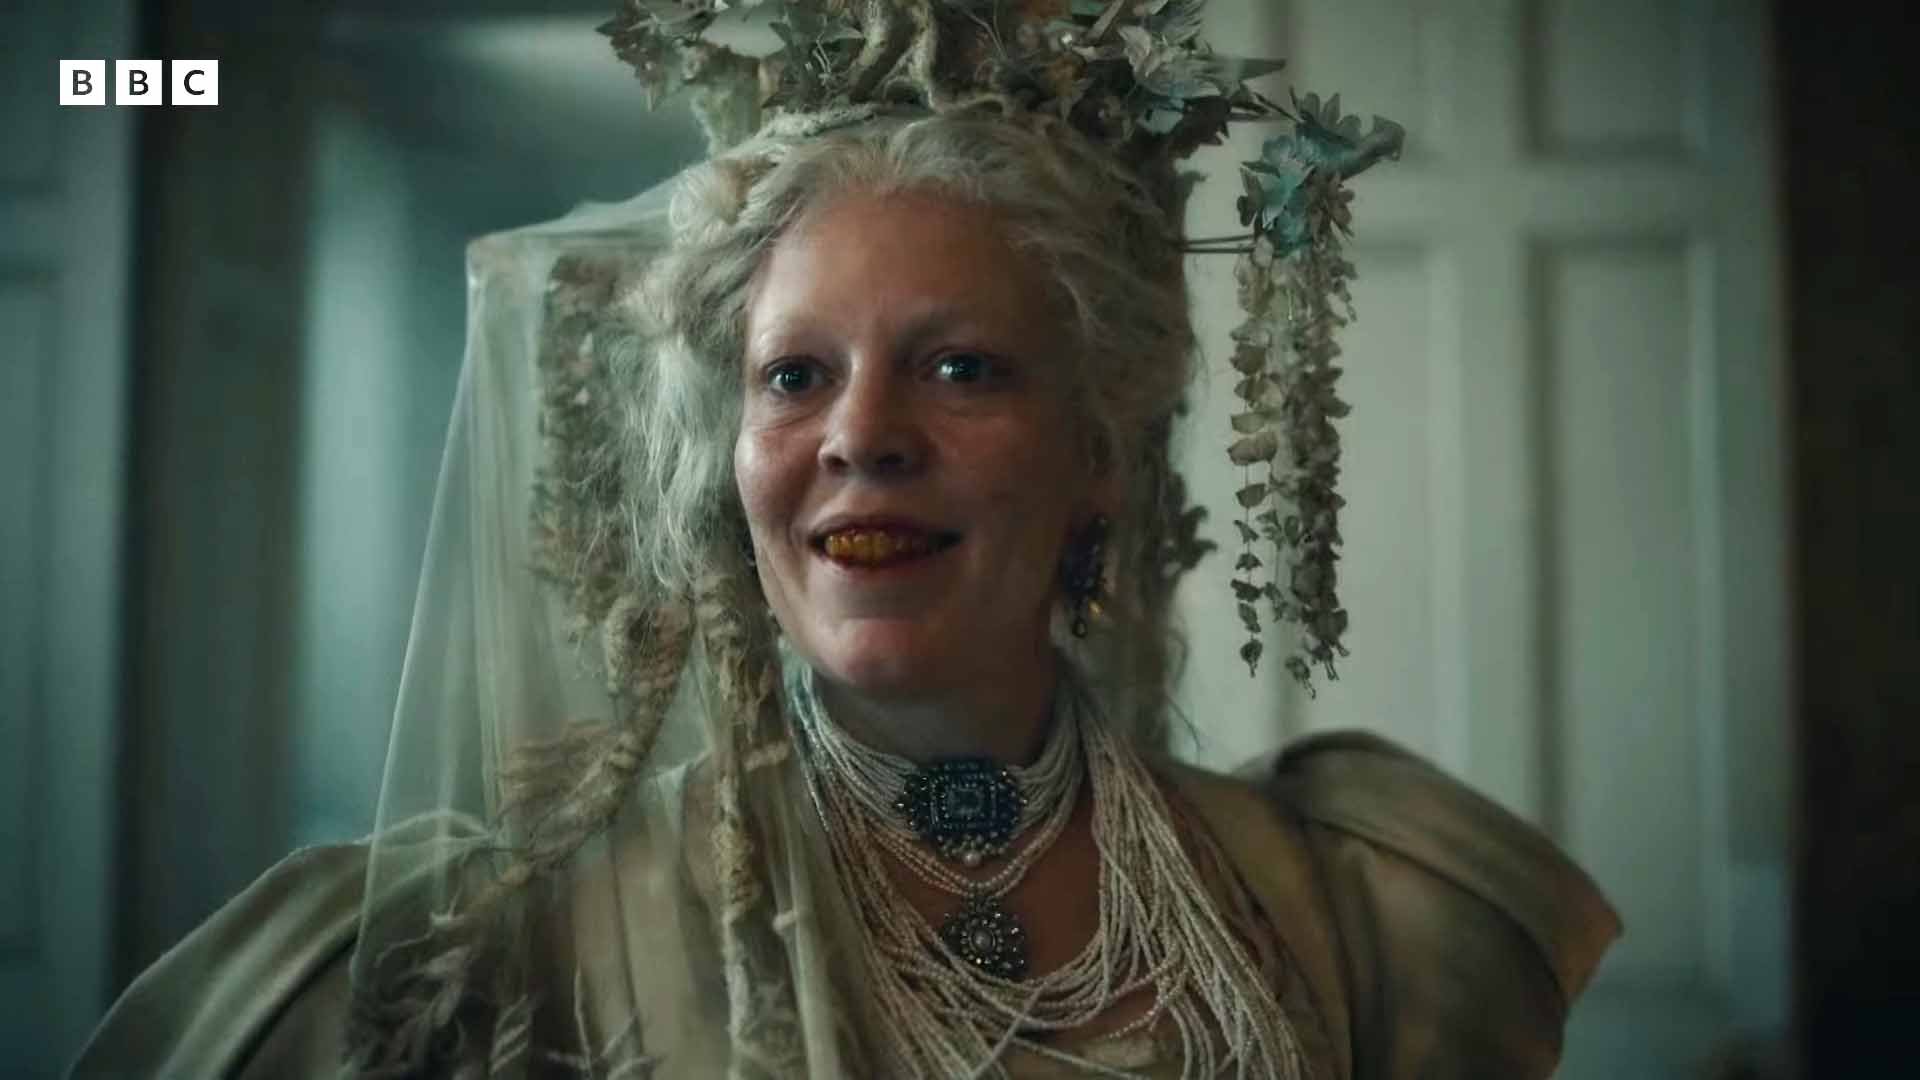 Steven Knight’s ‘darker’ Great Expectations includes spanking, references to slave trade and Miss Havisham’s opium addiction